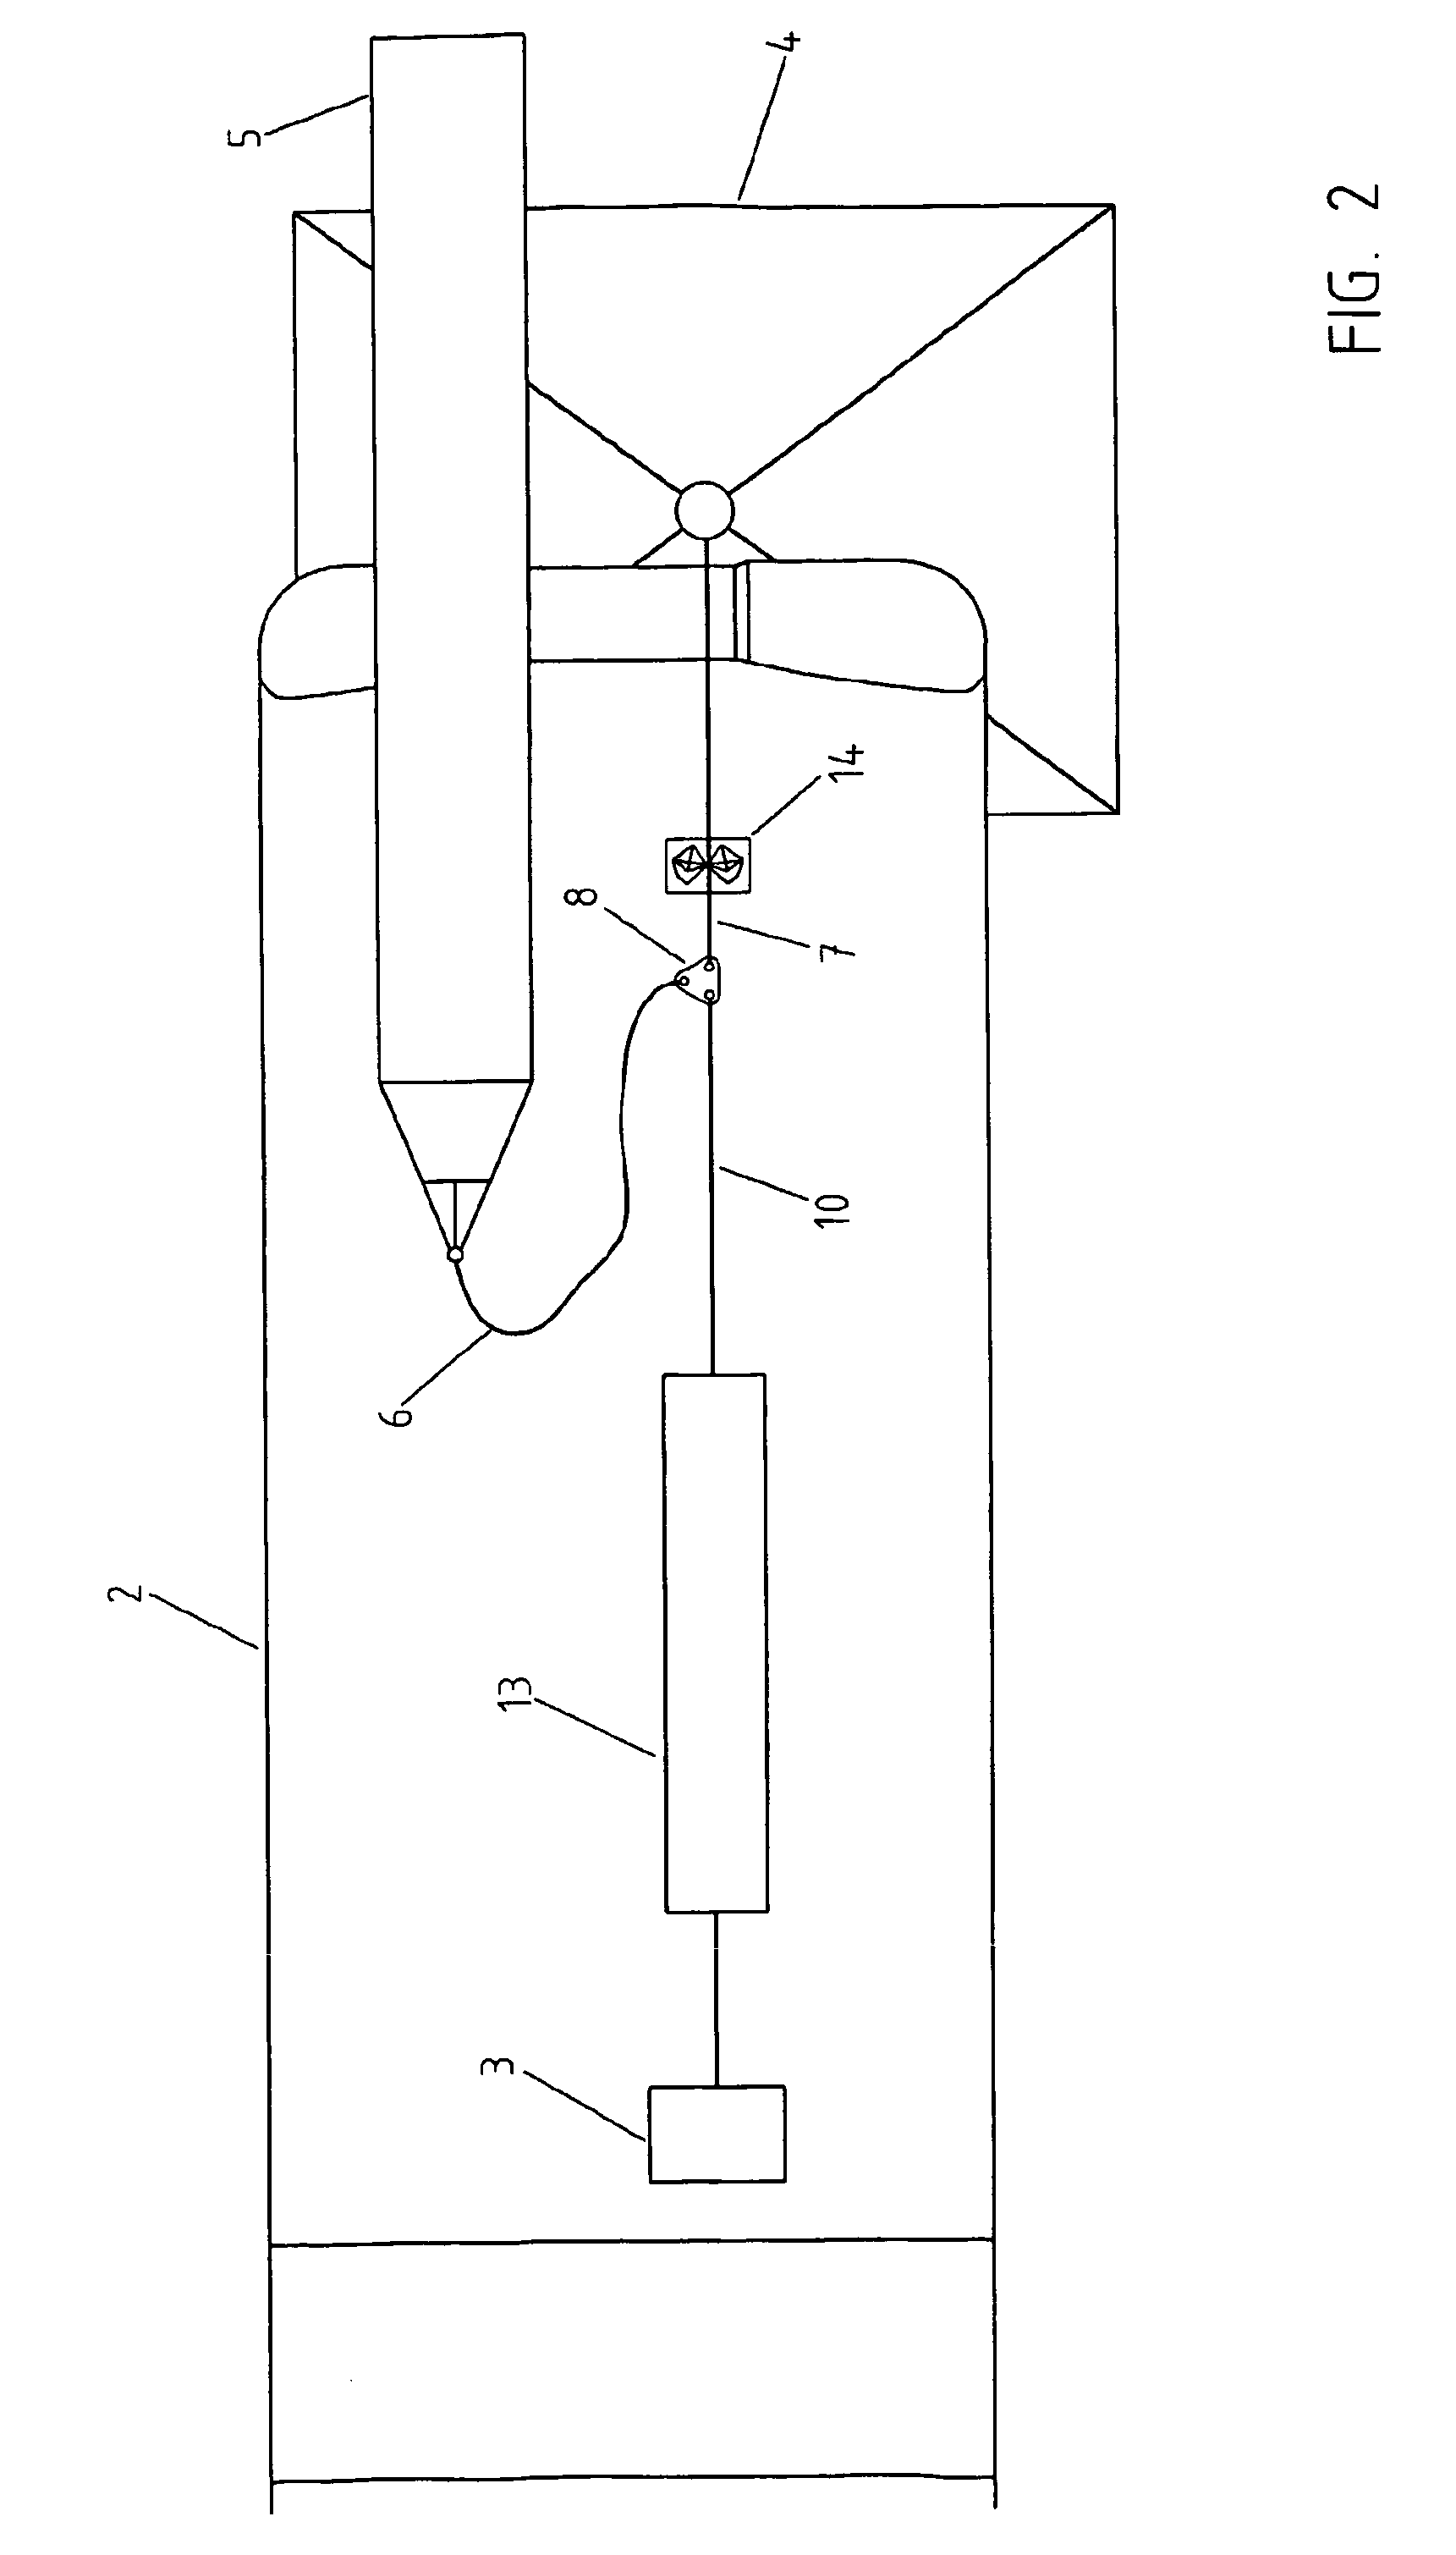 Method for underwater transportation and installation or removal of objects at sea